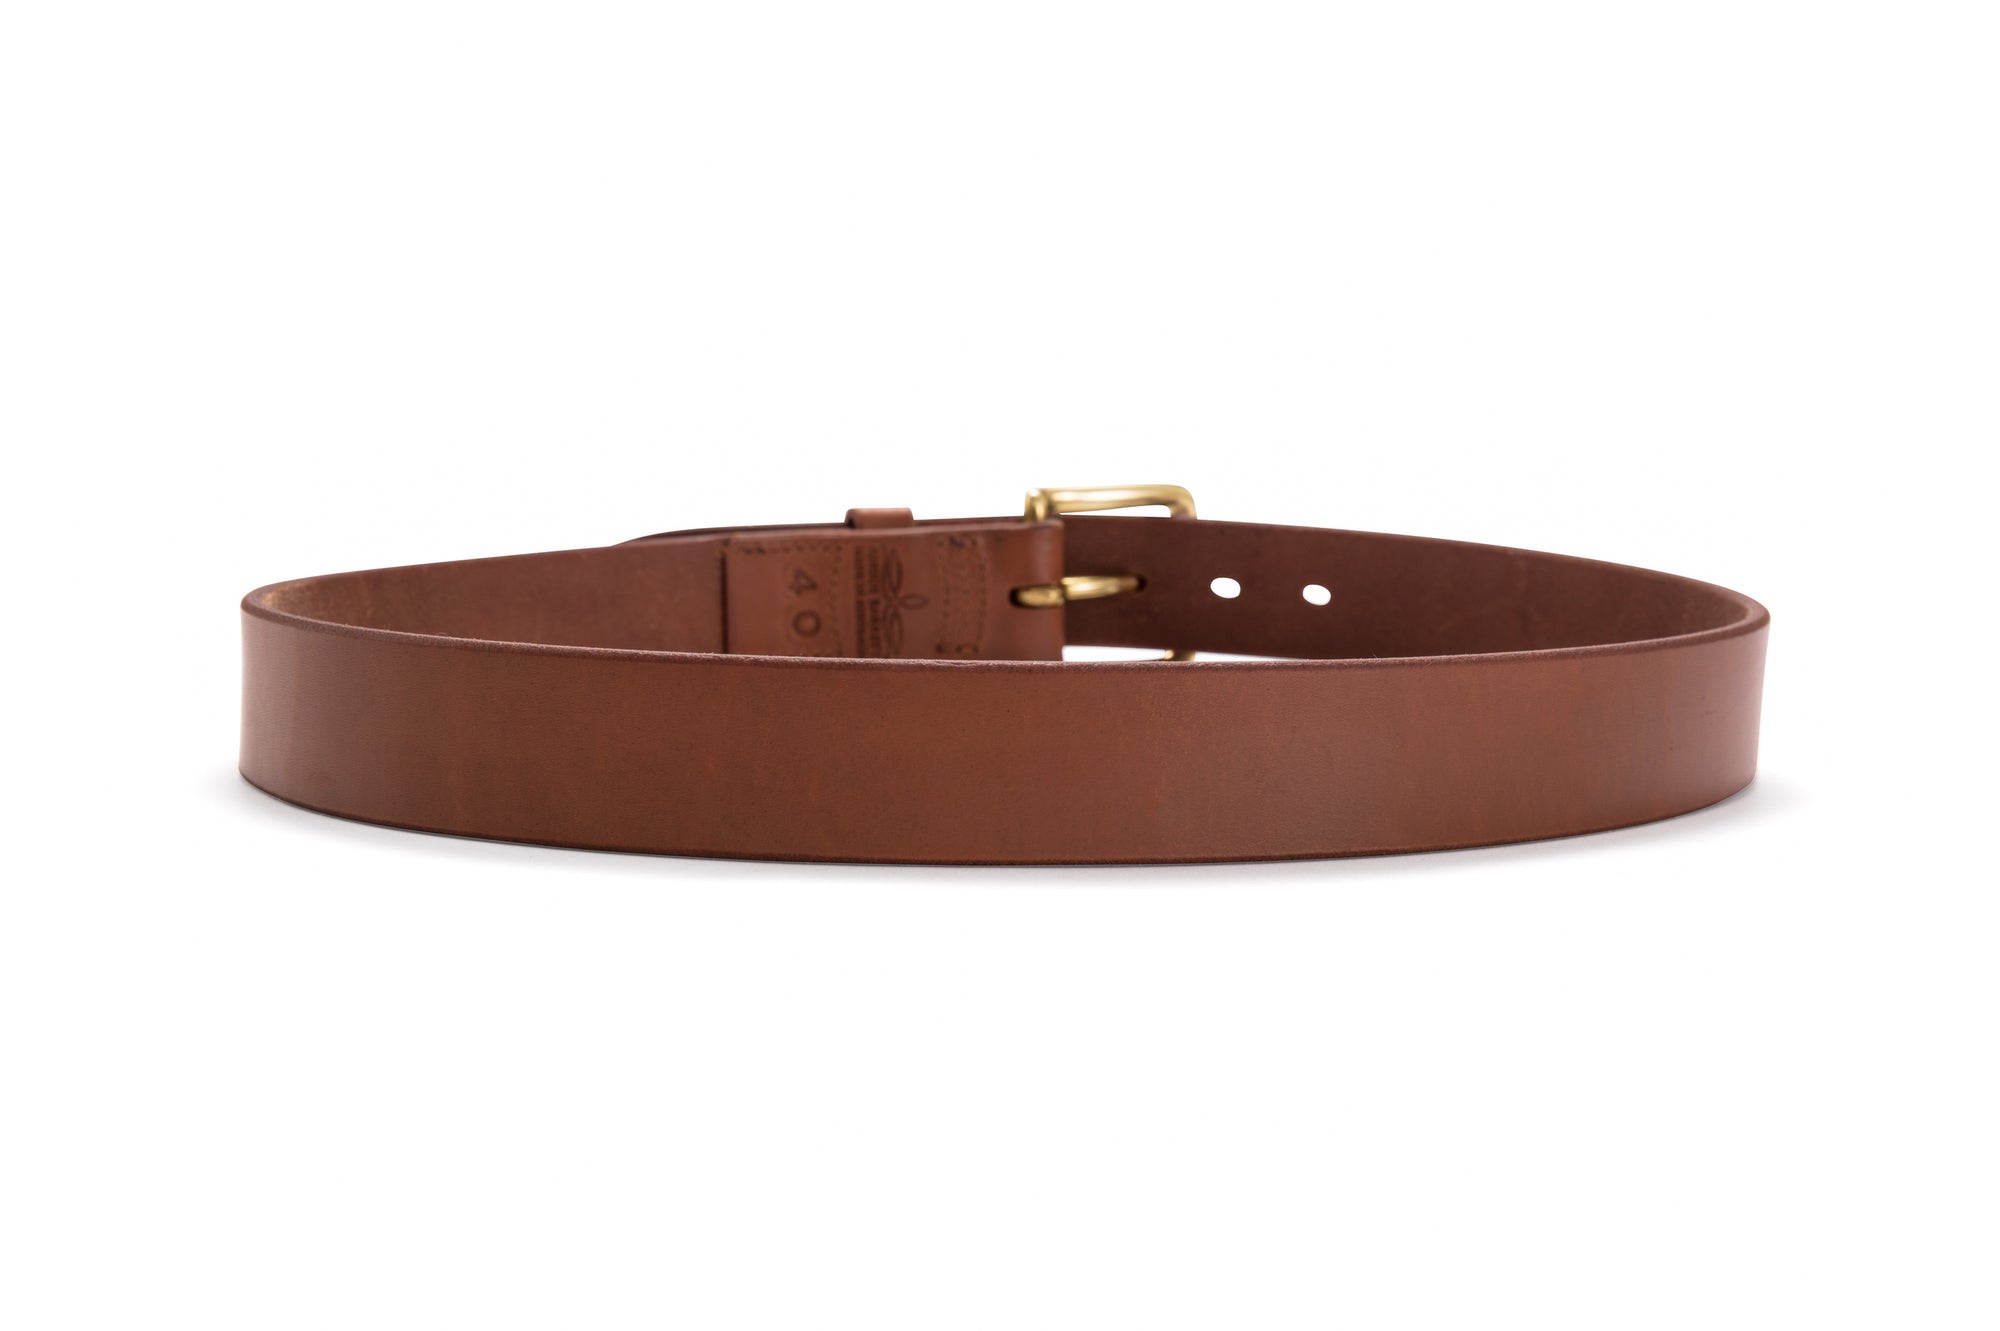 Brunette Leather Belt with Solid Brass Buckle - Angus Barrett Saddlery